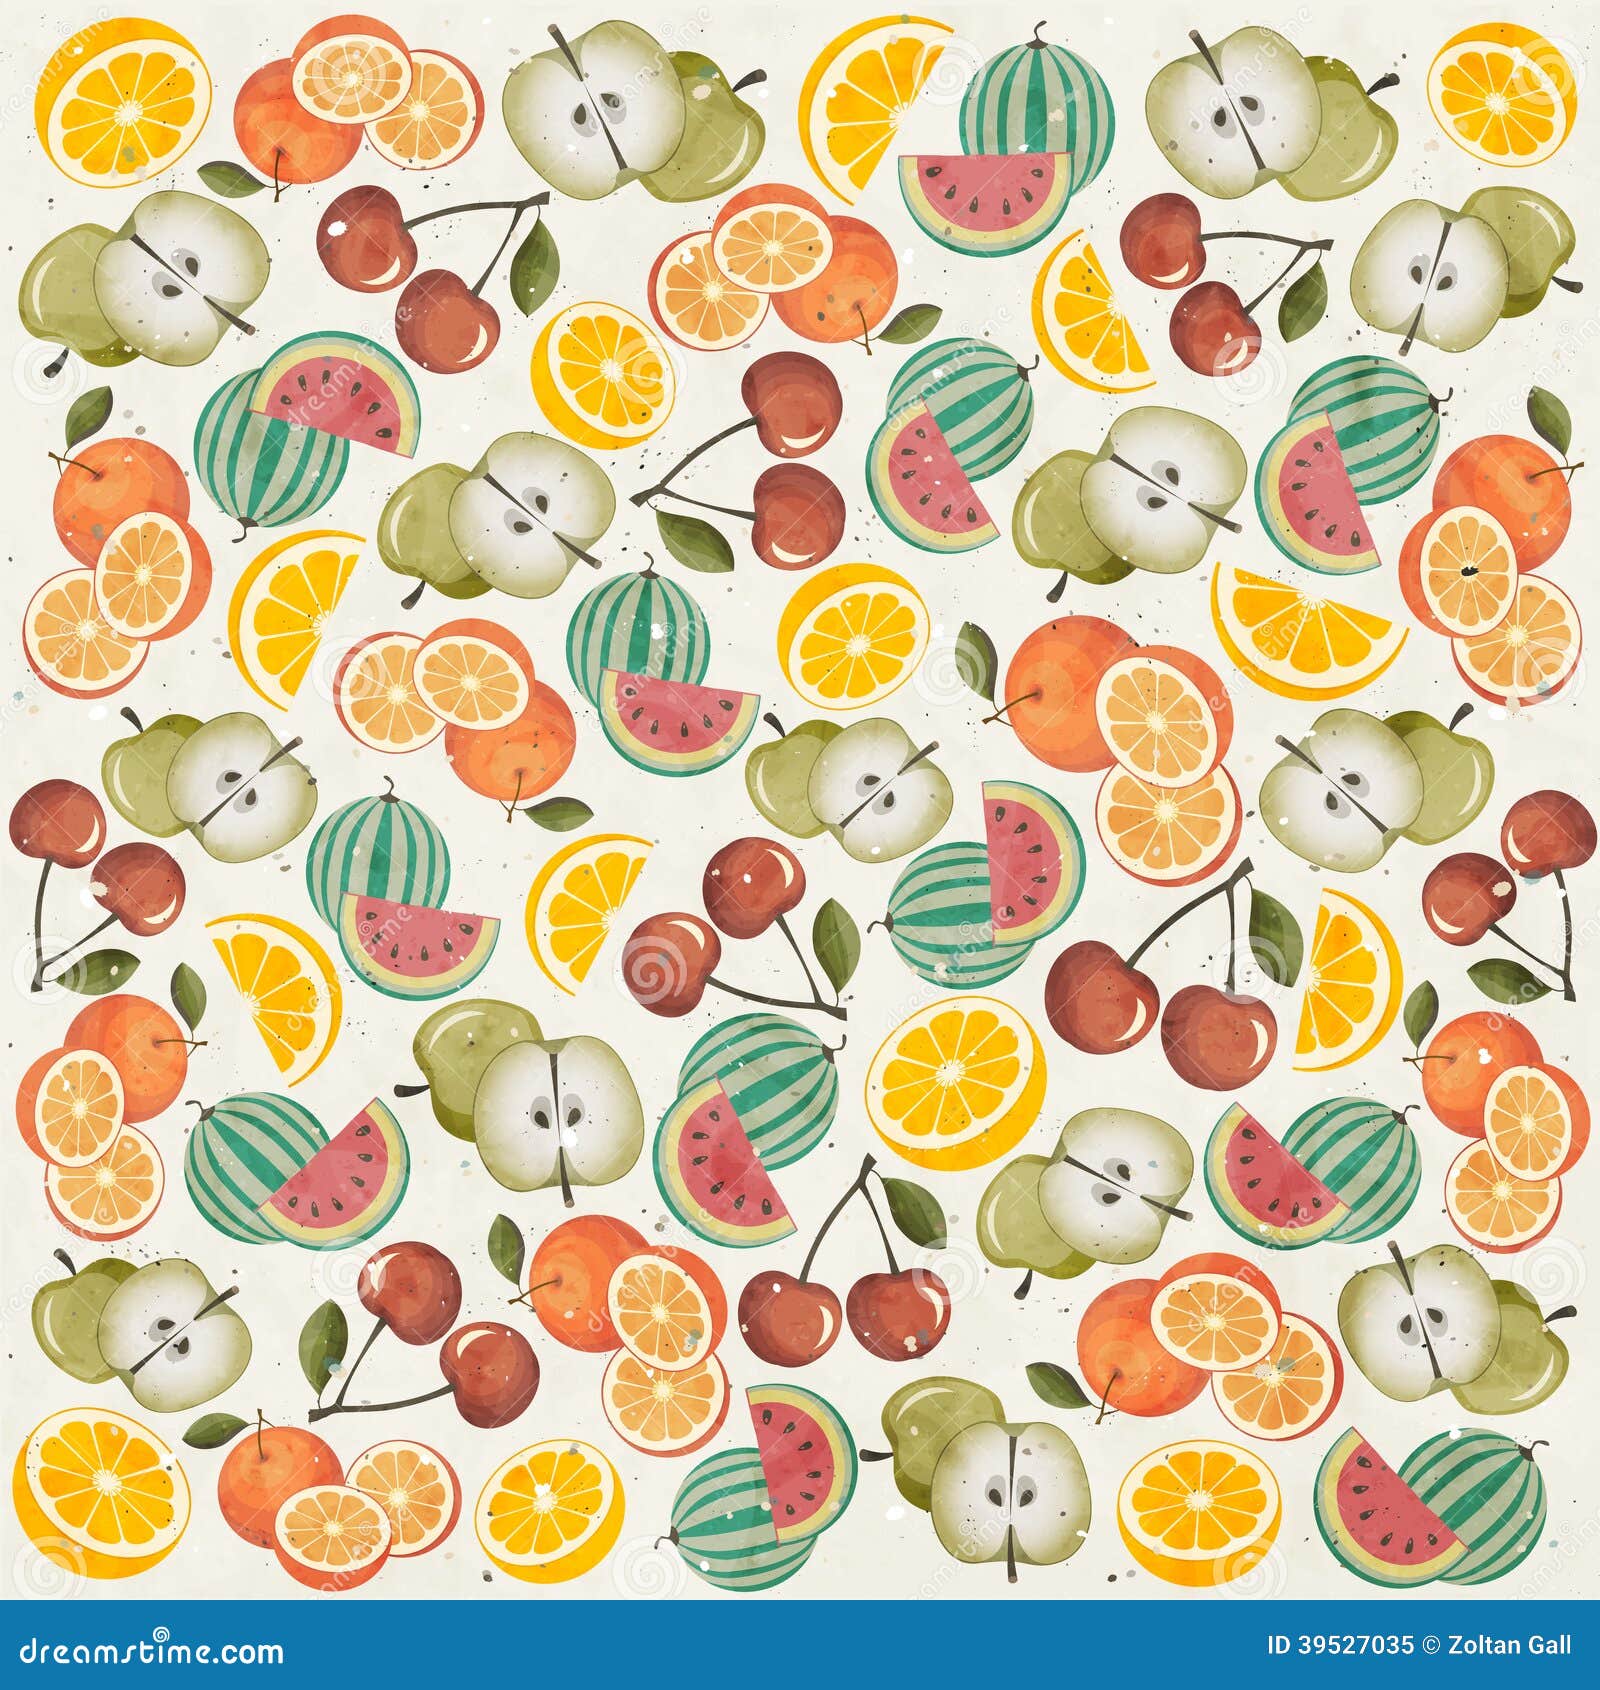 Free download 5 Totally Rad Retro Apple Wallpapers OSXDaily 1680x1050 for  your Desktop Mobile  Tablet  Explore 9 Retro Macbook Wallpapers  Macbook  Wallpapers Macbook Wallpaper Retro Wallpapers